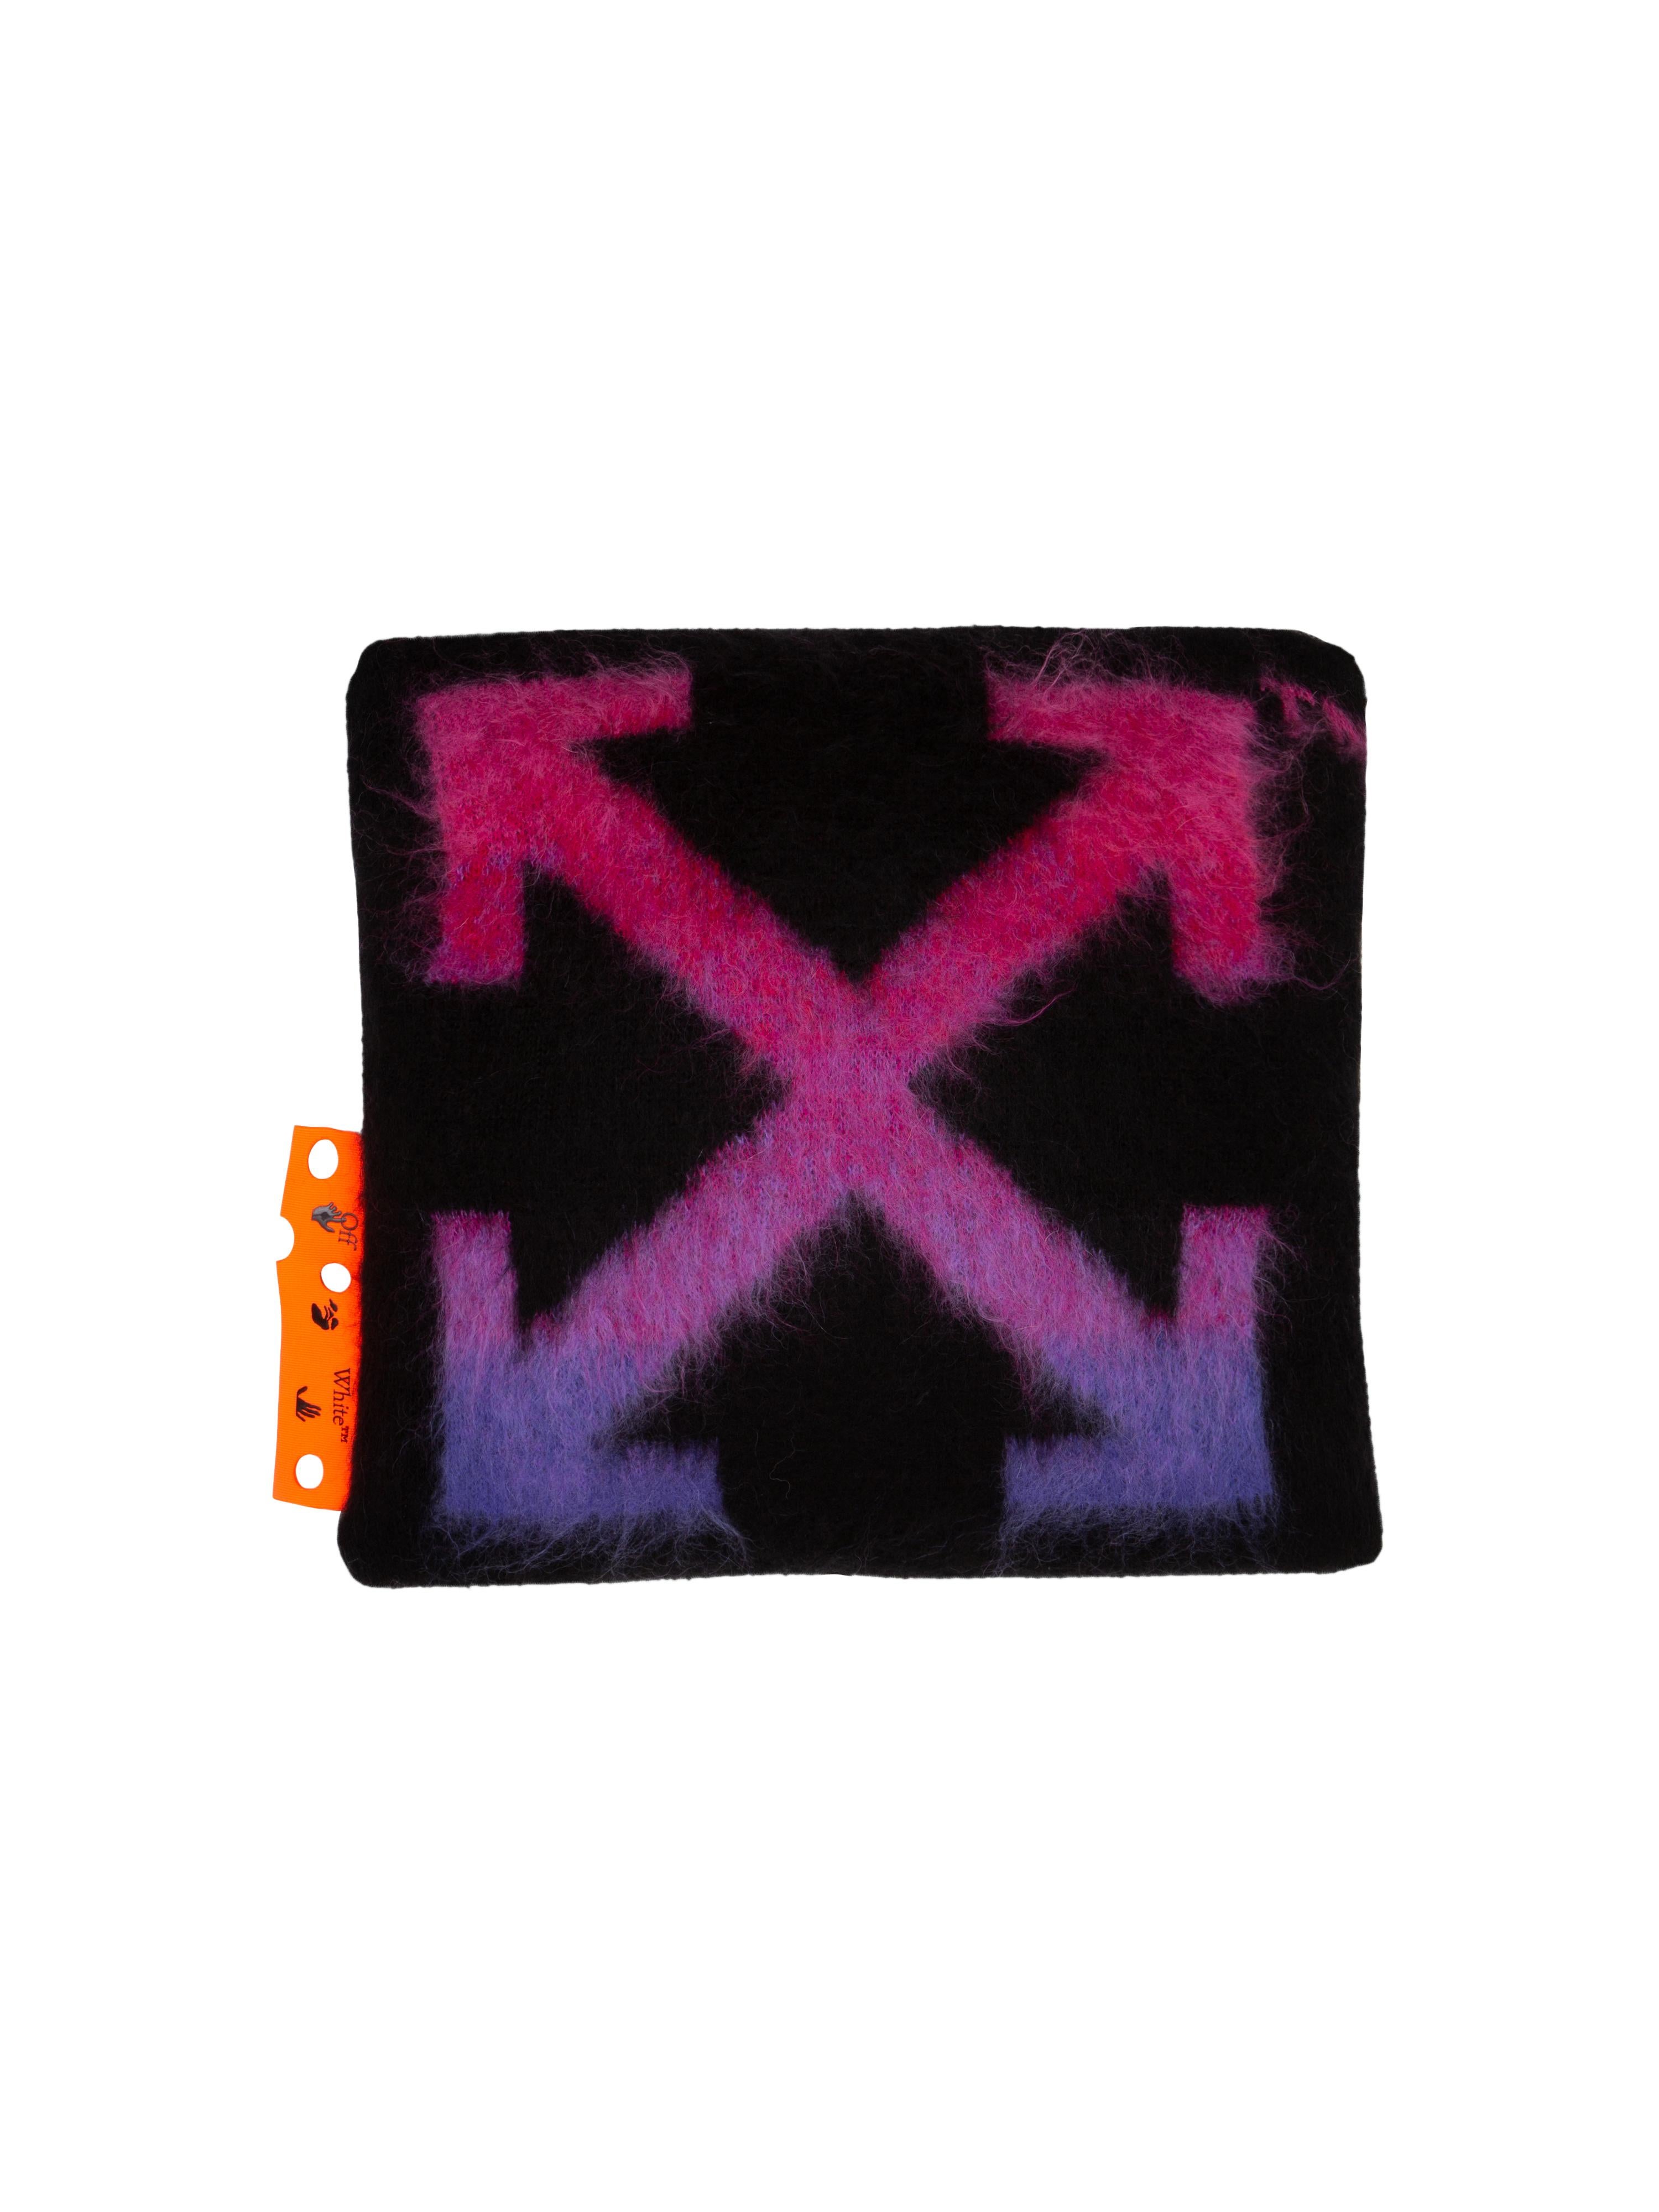 Brushed mohair Small Pillow with big gradient arrow, pop colors variations
By Virgil Abloh
Dimensions: 45 W x 45 H
This item is only available to be purchased and shipped to the United States.